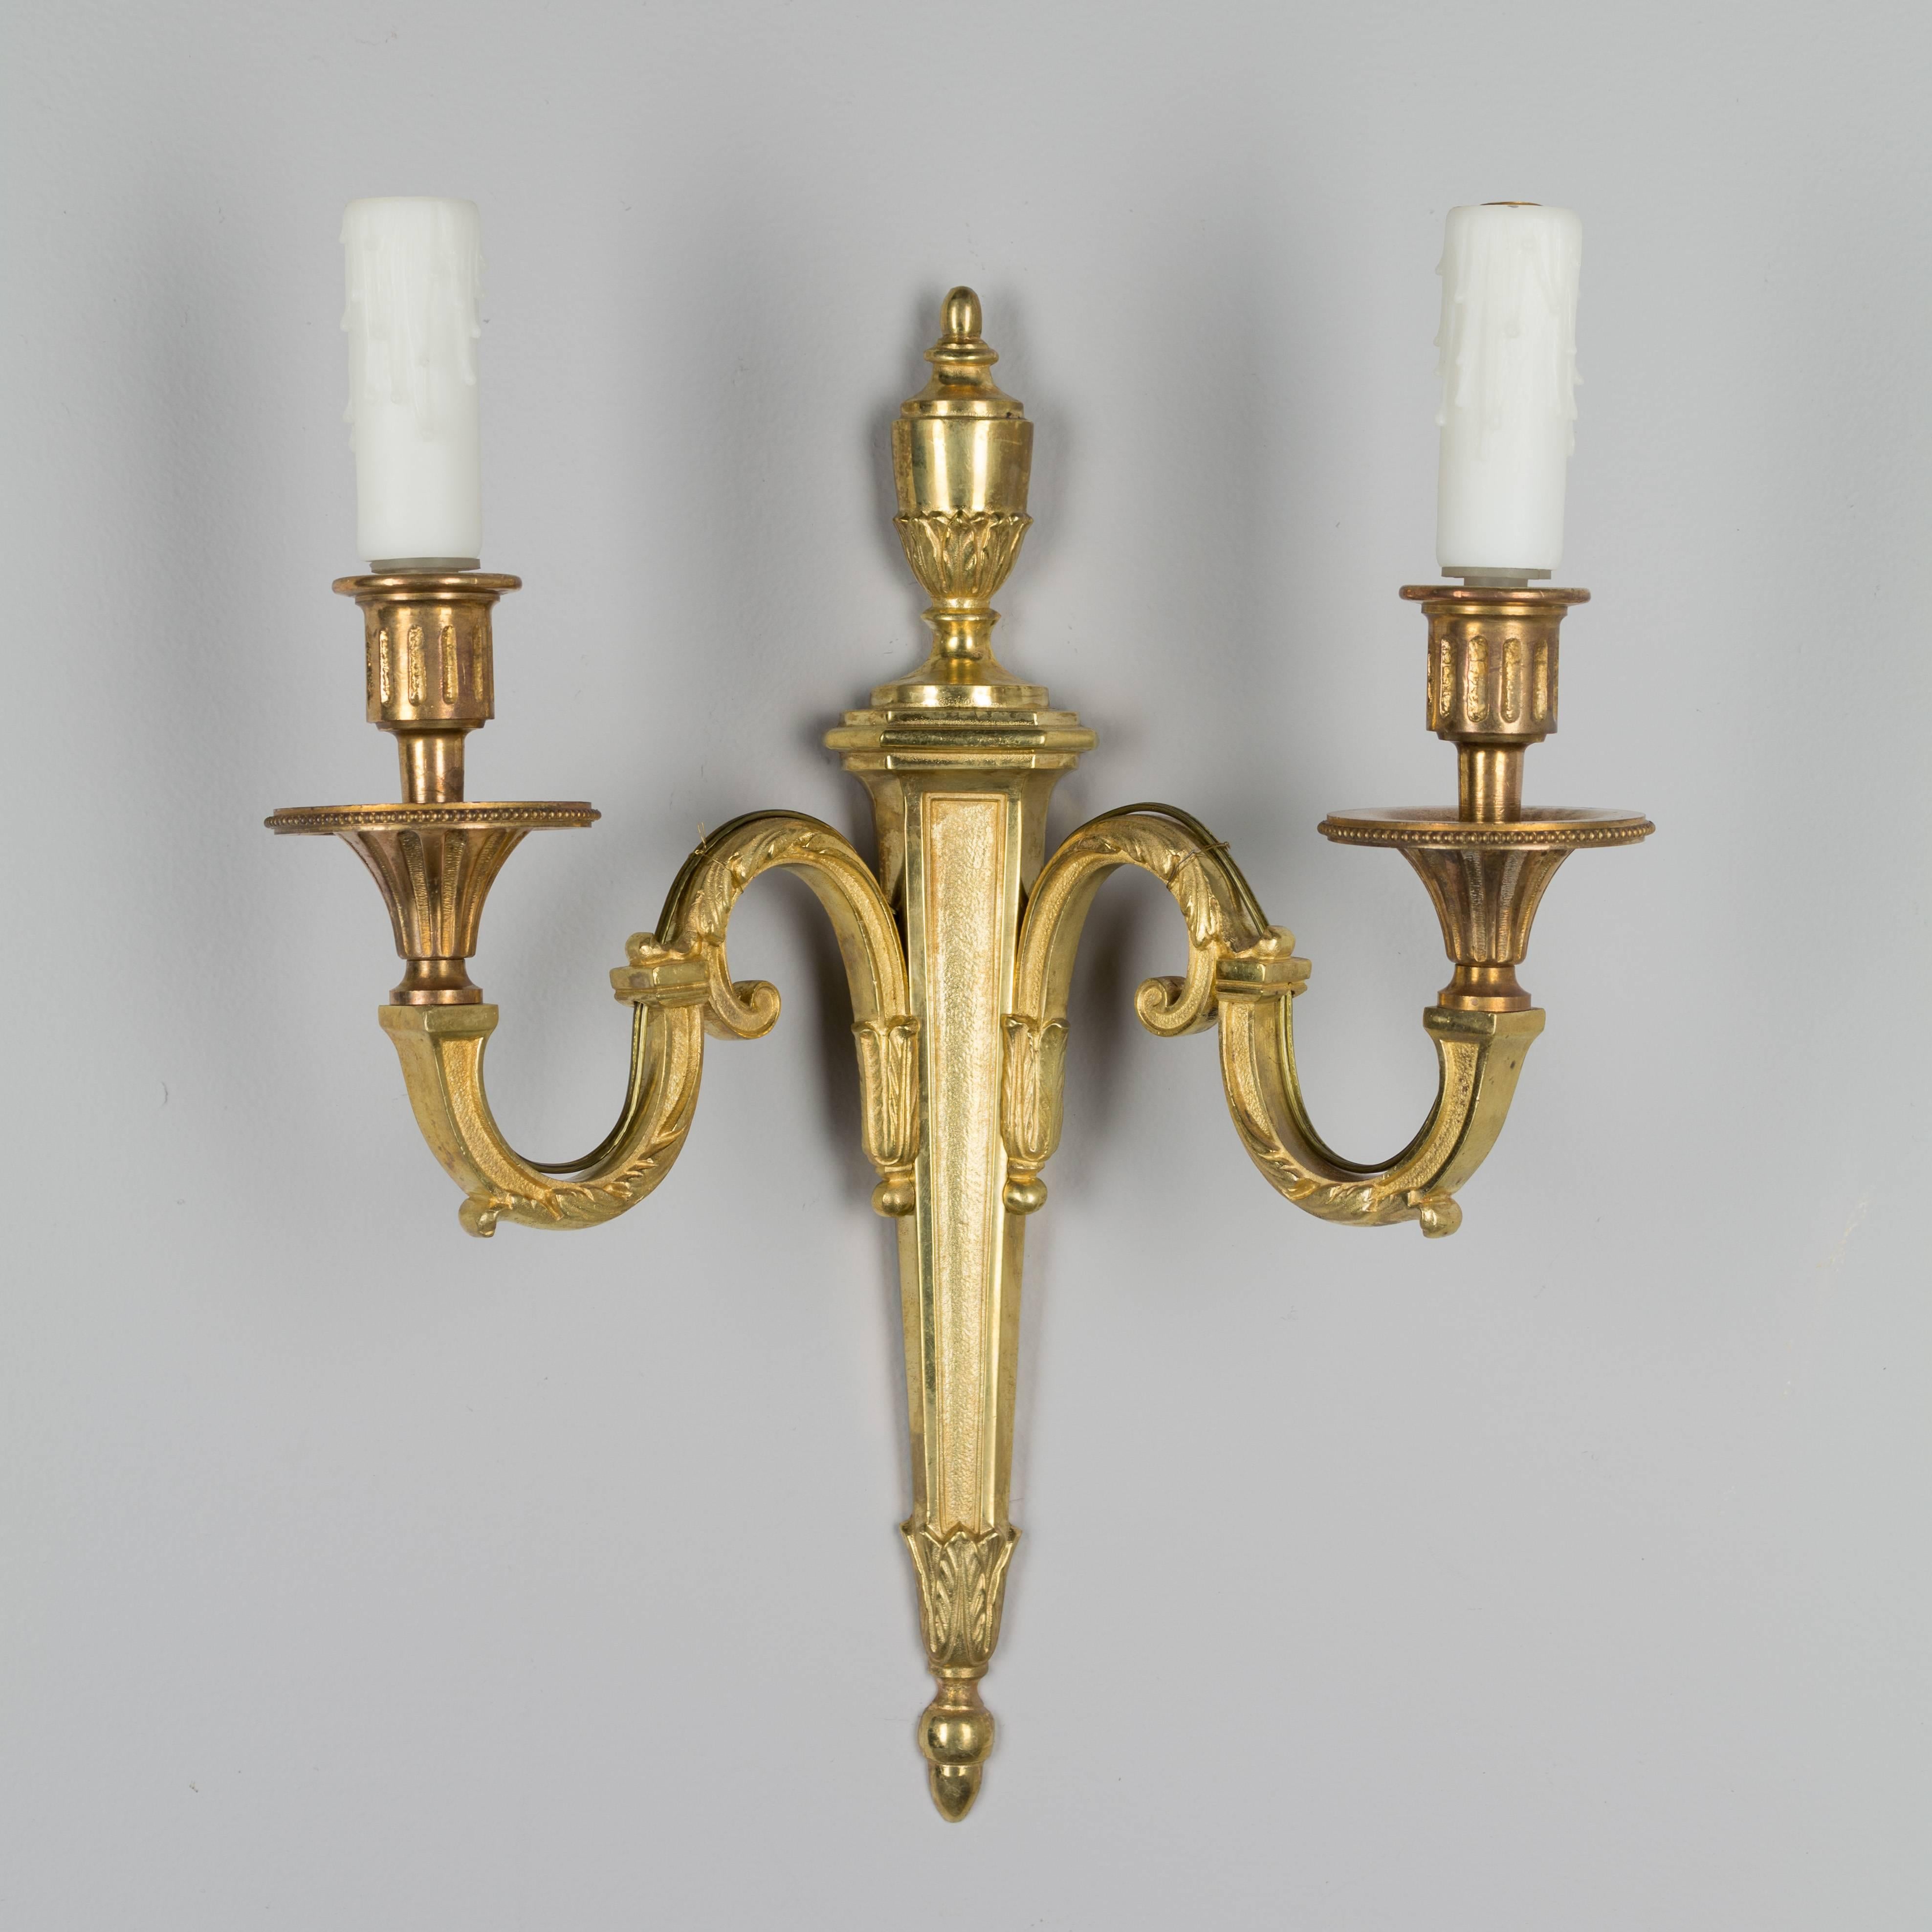 Pair of Louis XVI style two-light bronze sconces with  gold patina. Rewired with European sockets. New resin candle covers. Two pairs available. $650/pair.
More photos available upon request. We have a large selection of French antiques. Please